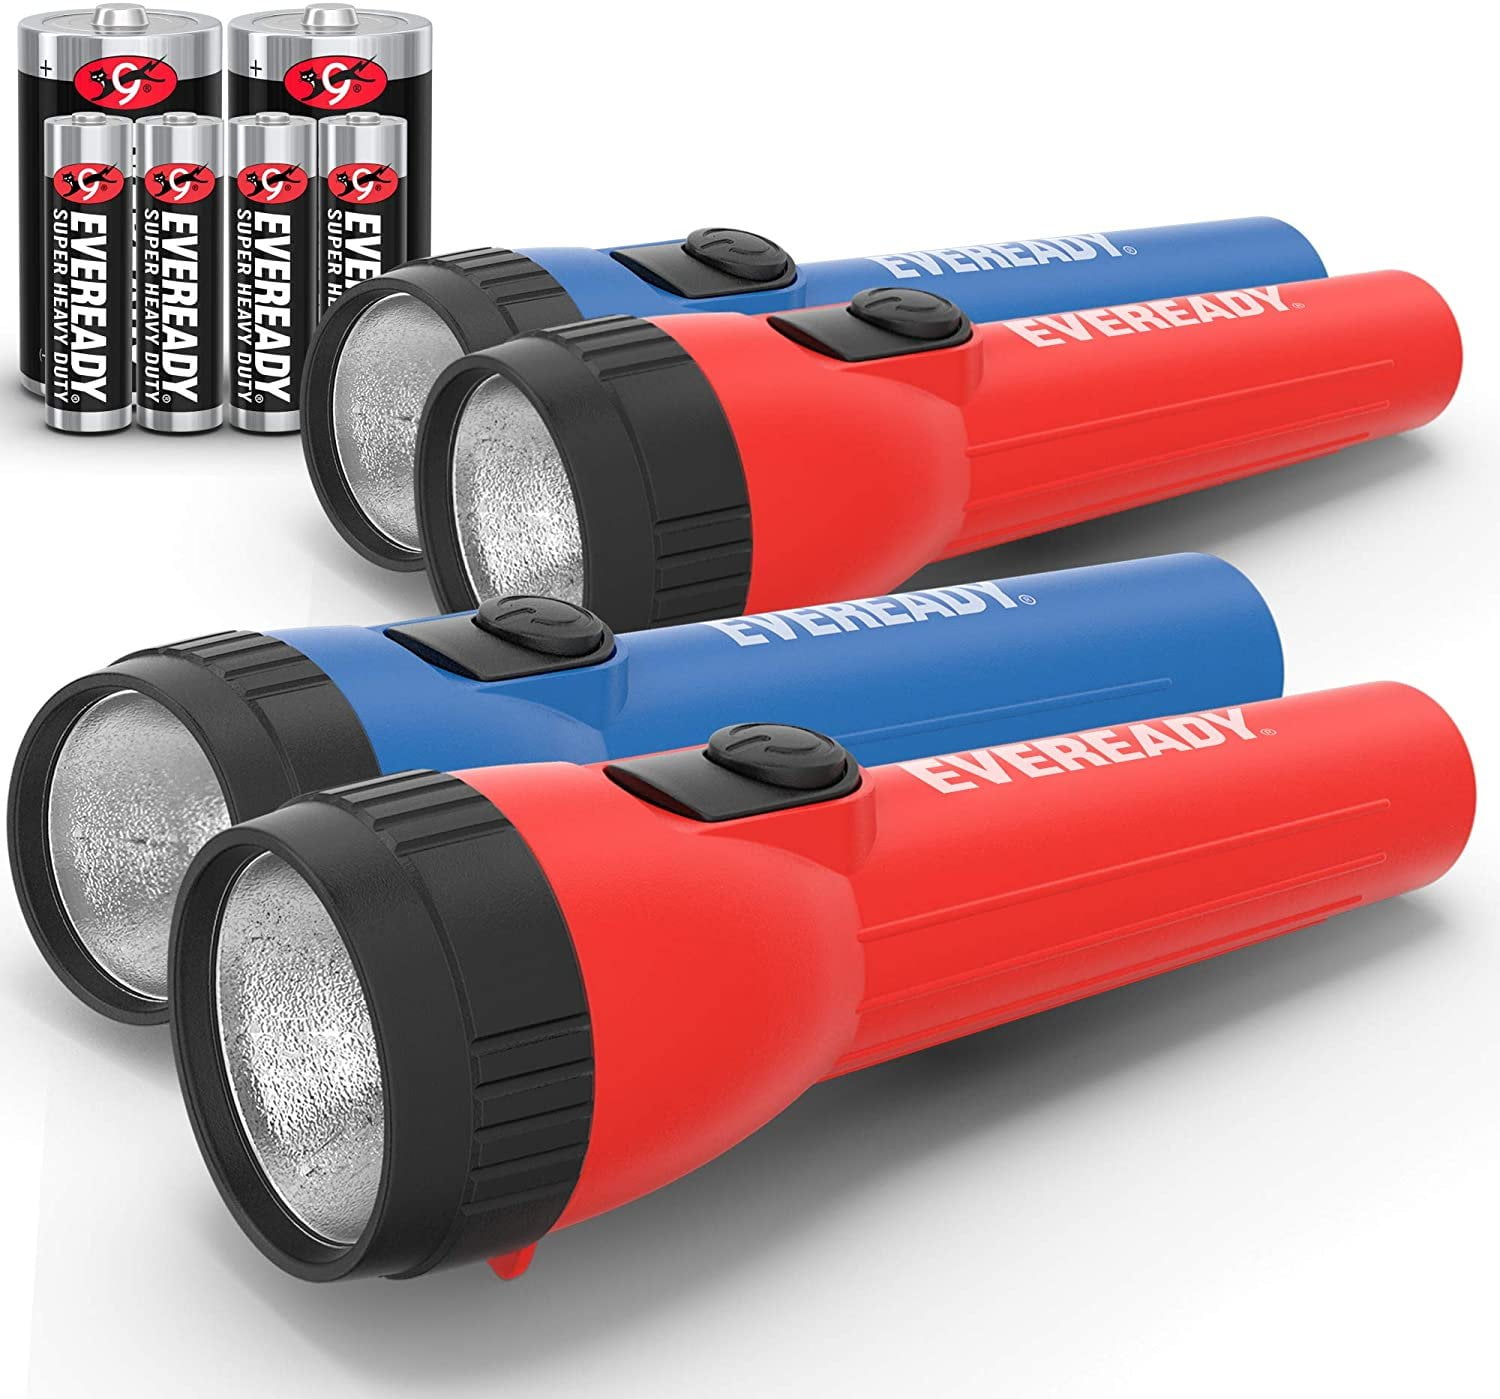 2 Pack Eveready Hybrid Power LED Rechargeable Camping Emergncy